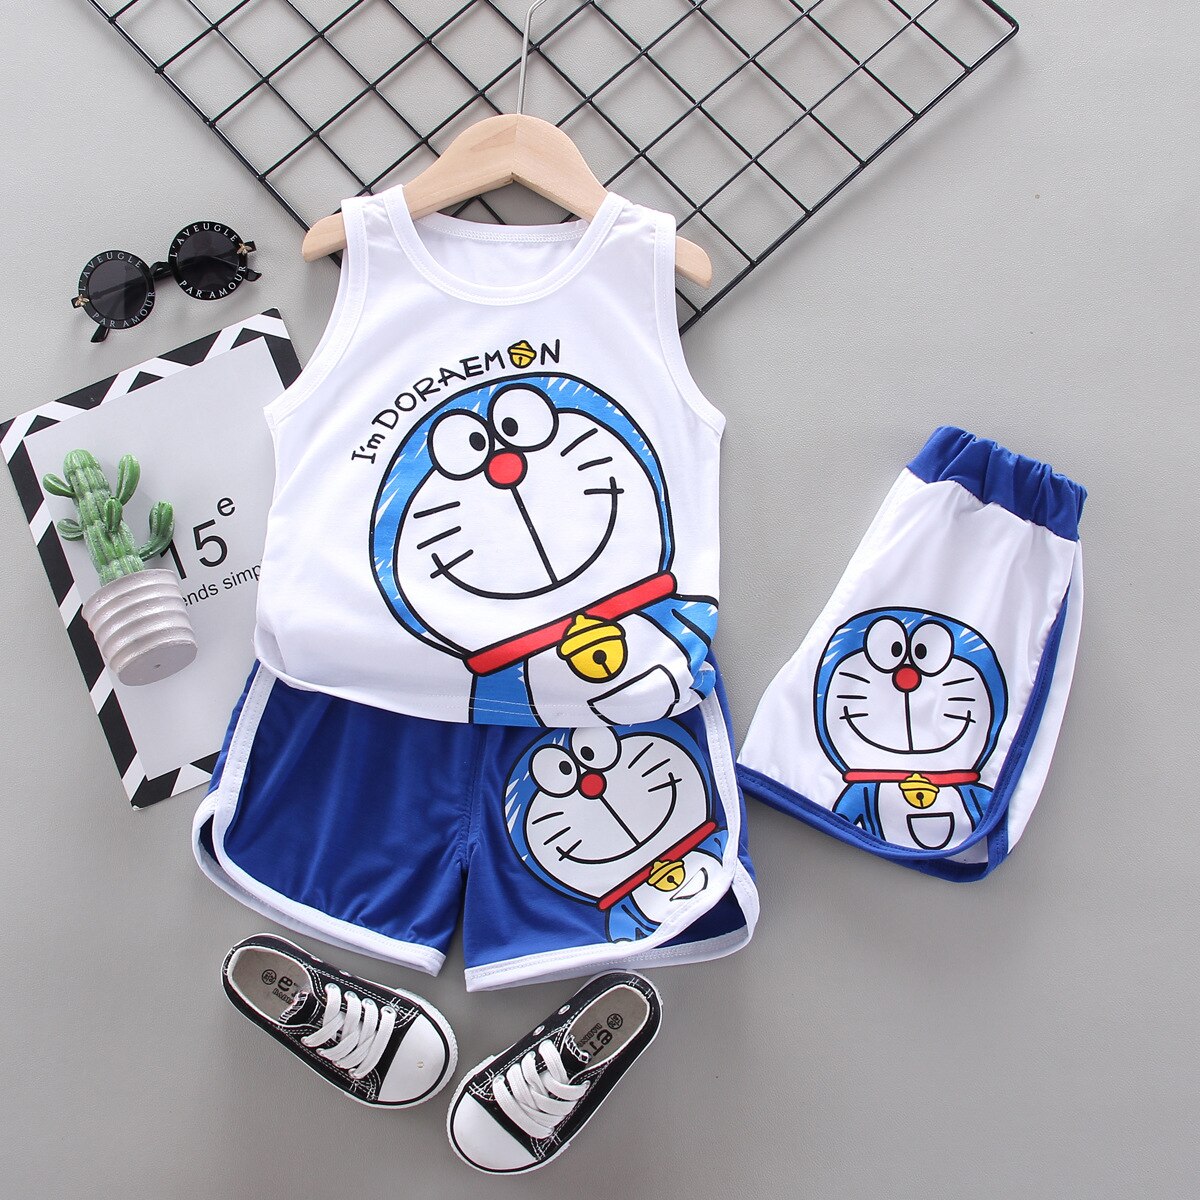 shop with crypto buy Baby Boys Summer Clothes Sets Infant Kids Cartoon Doraemon Cotton Sleeveless T-shirt Vest+Shorts 2Pcs Suits Toddler Clothing pay with bitcoin